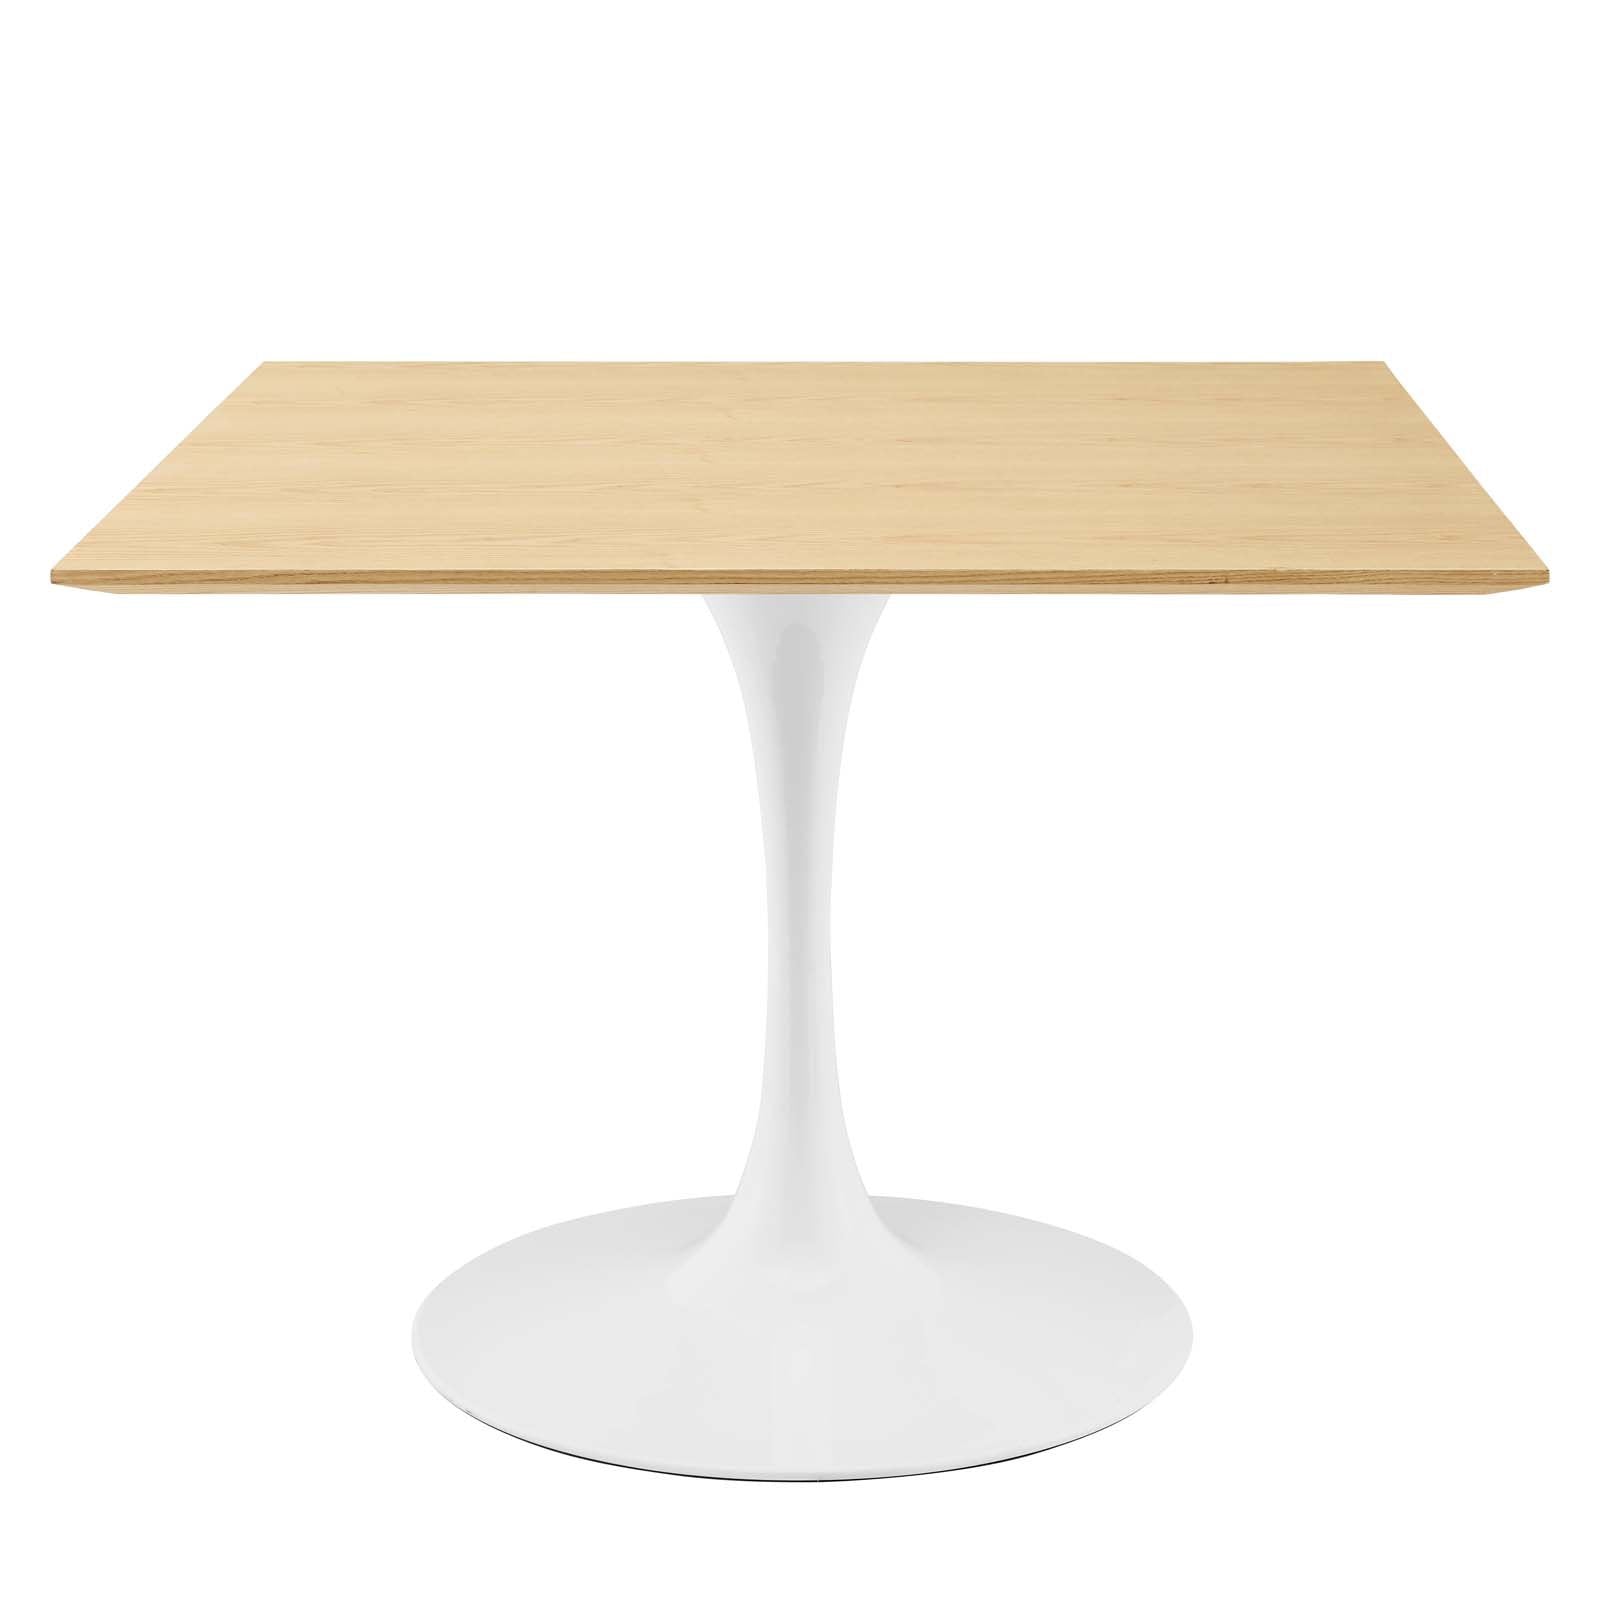 Lippa 40" Square Dining Table